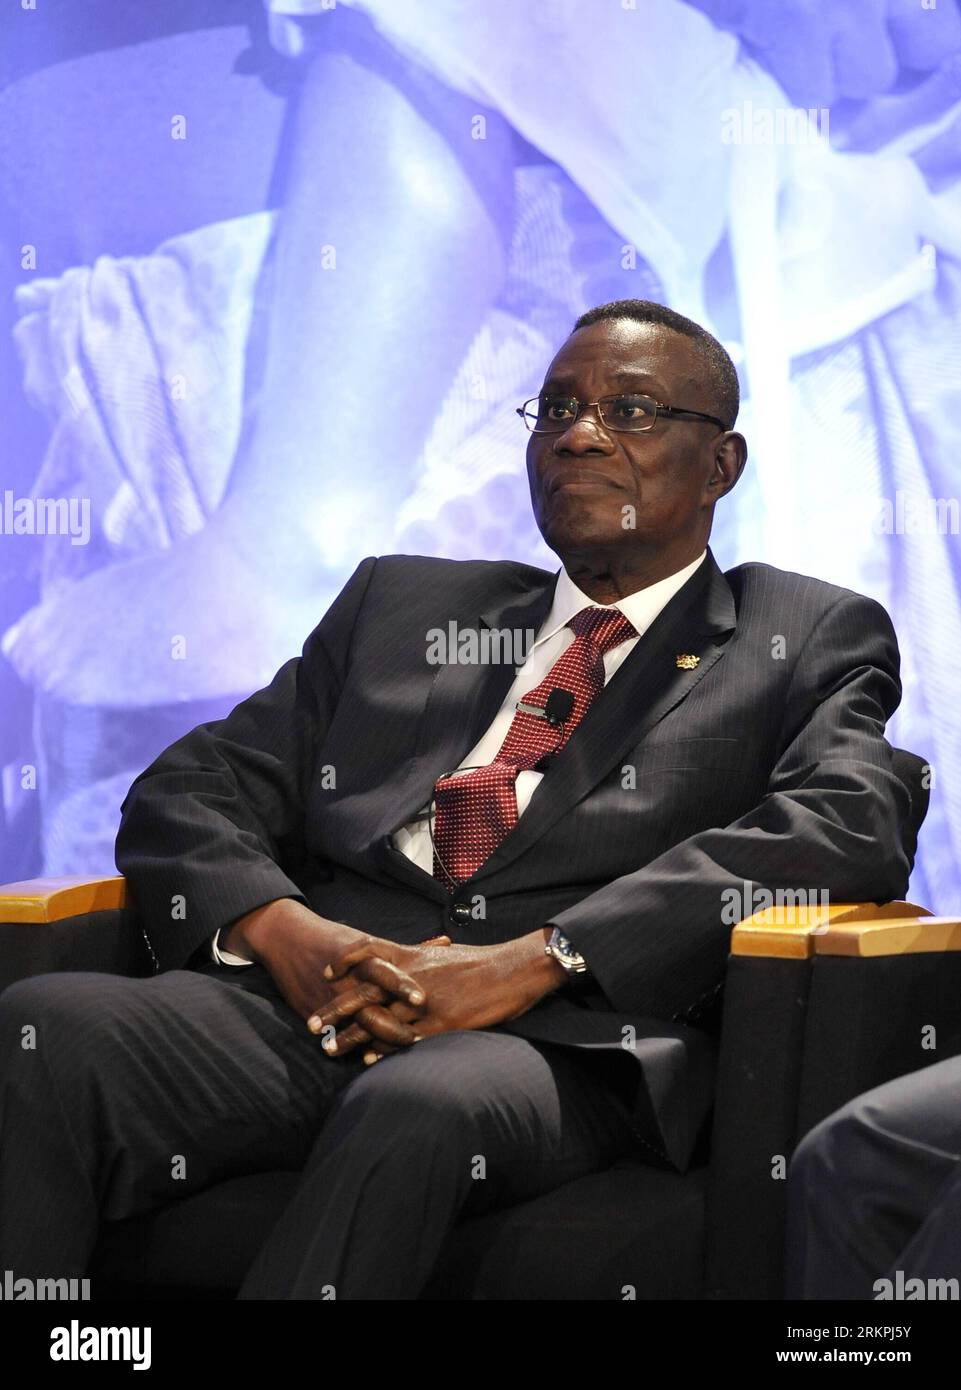 Bildnummer: 58004928  Datum: 18.05.2012  Copyright: imago/Xinhua (120518) -- WASHINGTON D.C., May 18, 2012 (Xinhua) -- Ghana s President John Evans Atta Mills is seen during a symposium on Global Agriculture and Food Security in Washington D.C., capital of the United States, May 18, 2012, on the sidelines of the G8 summit. (Xinhua/Wang Yiou) US-WASHINGTON-G8-FOOD SECURITY PUBLICATIONxNOTxINxCHN People Politik xda x0x 2012 hoch      58004928 Date 18 05 2012 Copyright Imago XINHUA  Washington D C May 18 2012 XINHUA Ghana S President John Evans Atta Mills IS Lakes during a Symposium ON Global Agr Stock Photo